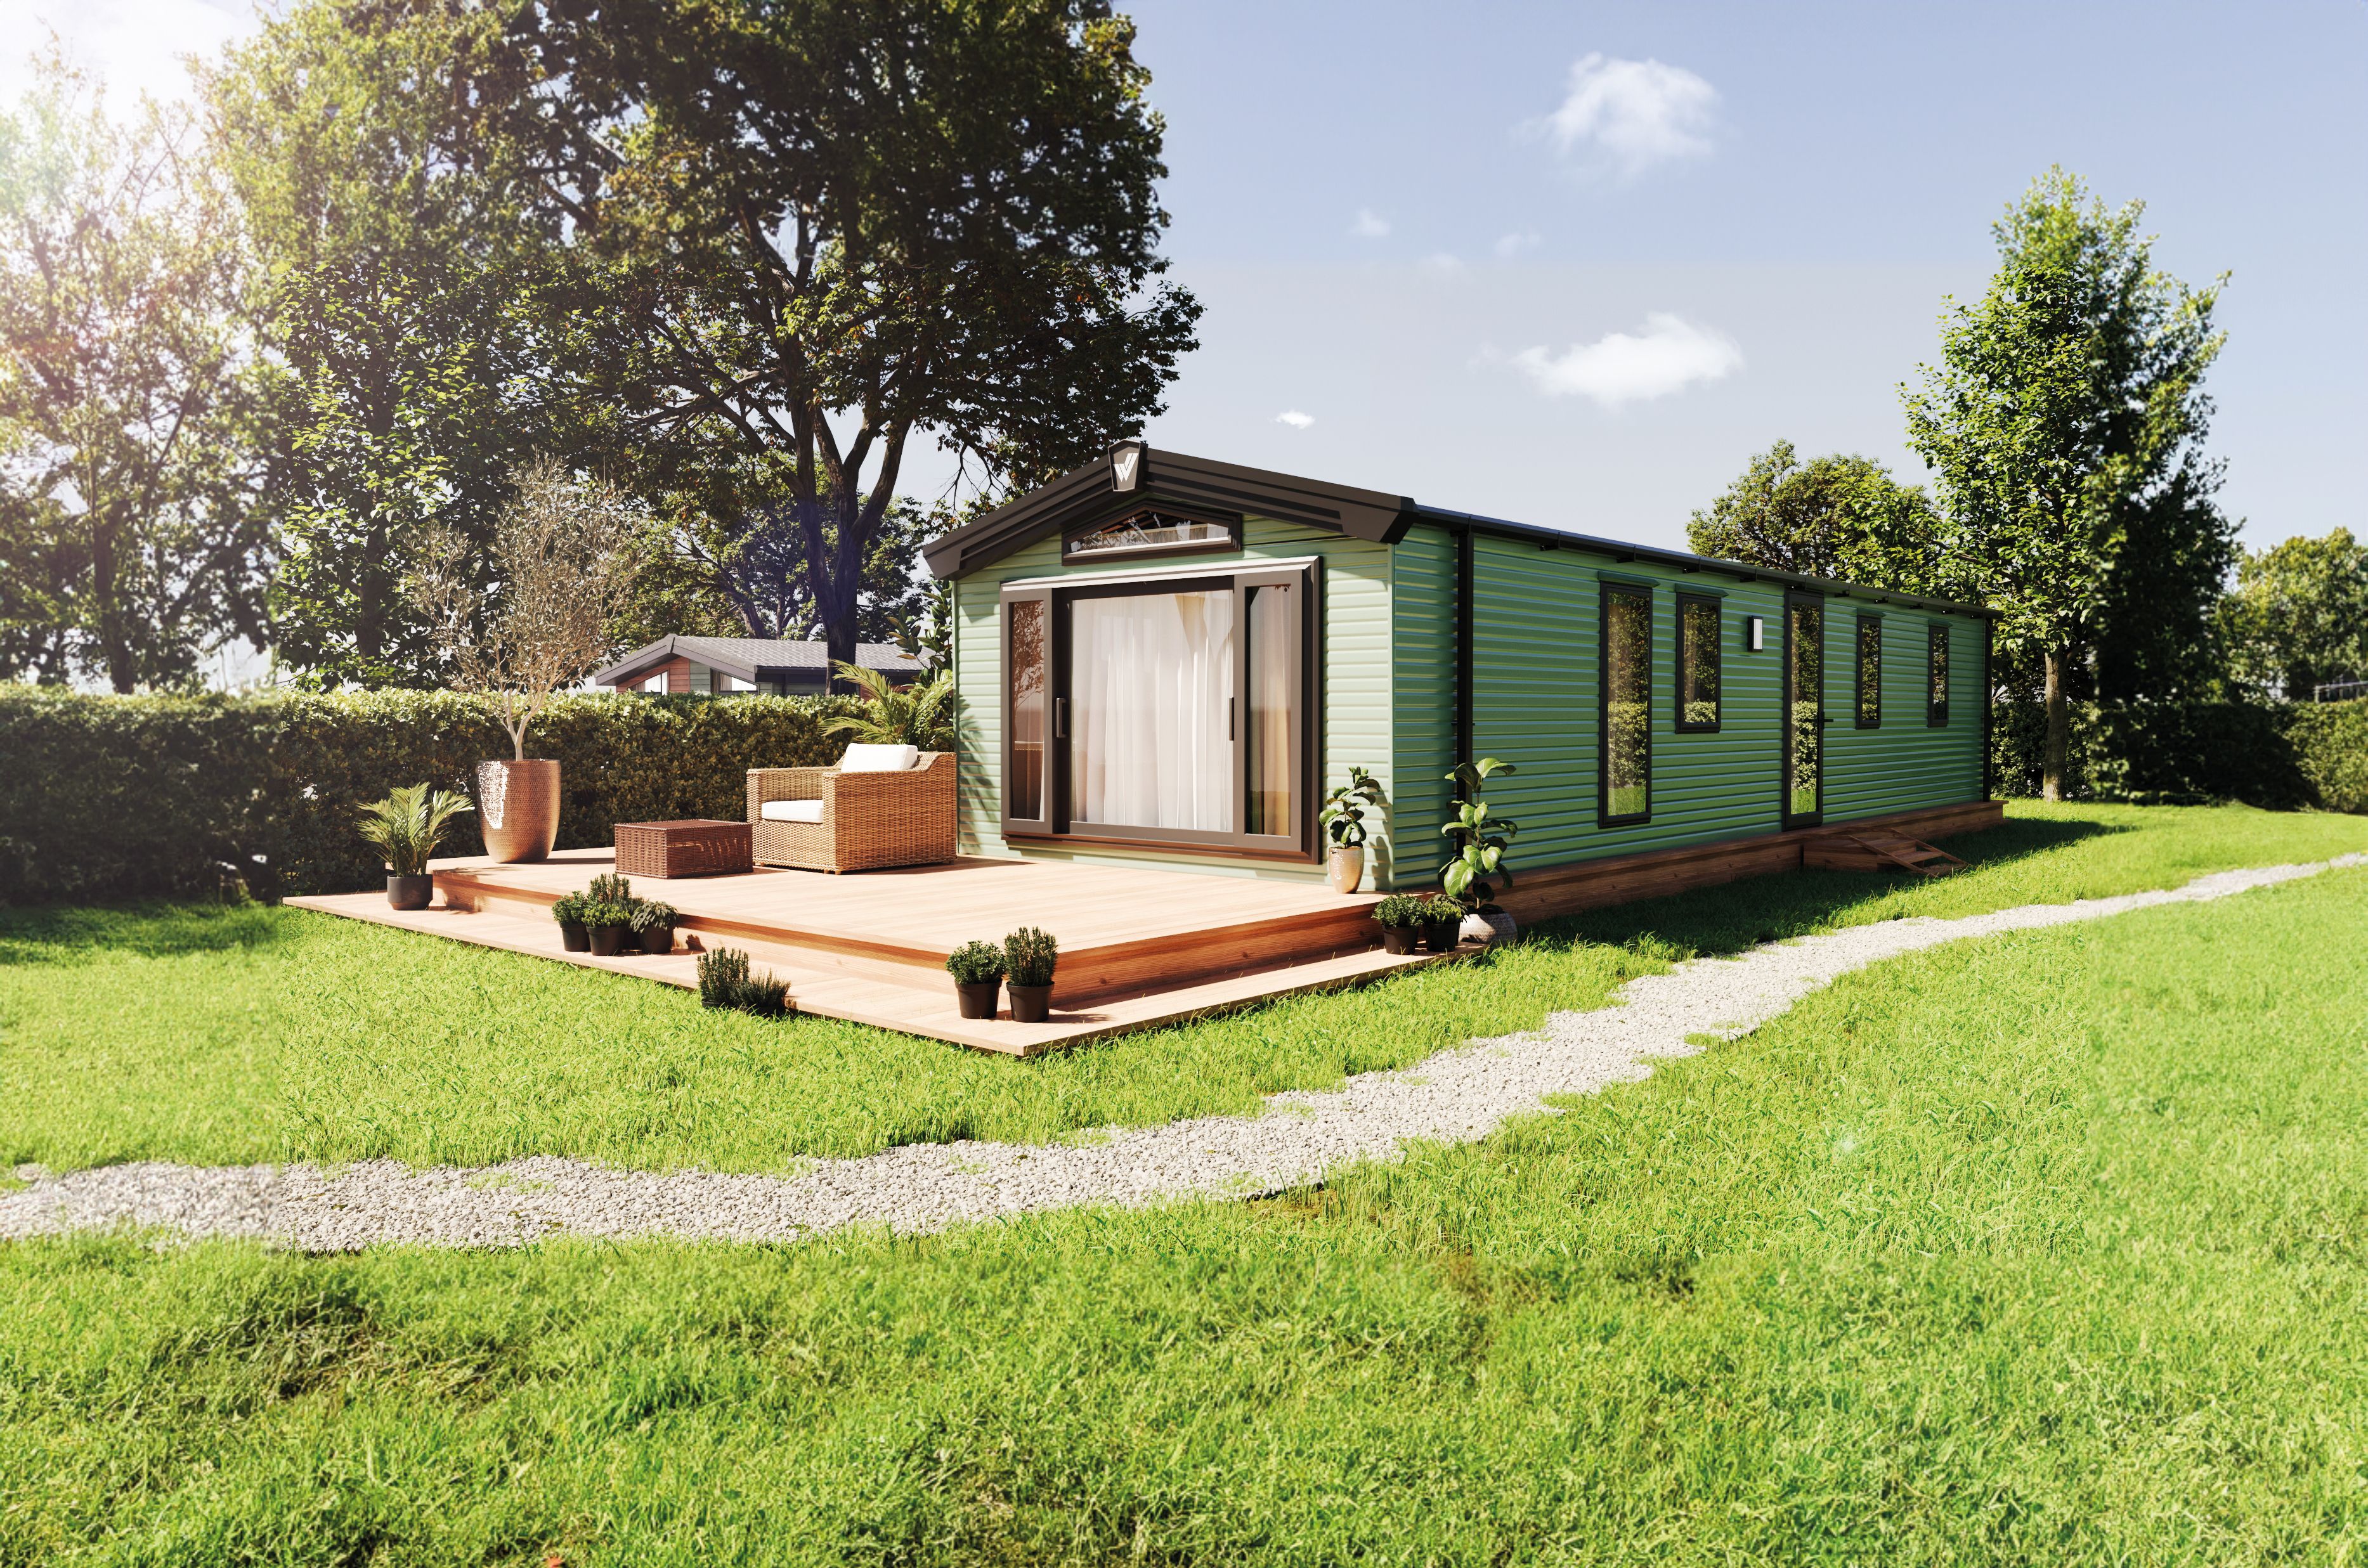 The Willerby Buxton holiday home on a grassy park with wooden decking. It has large windows at the front and is clad in a stylish sage green colour. 